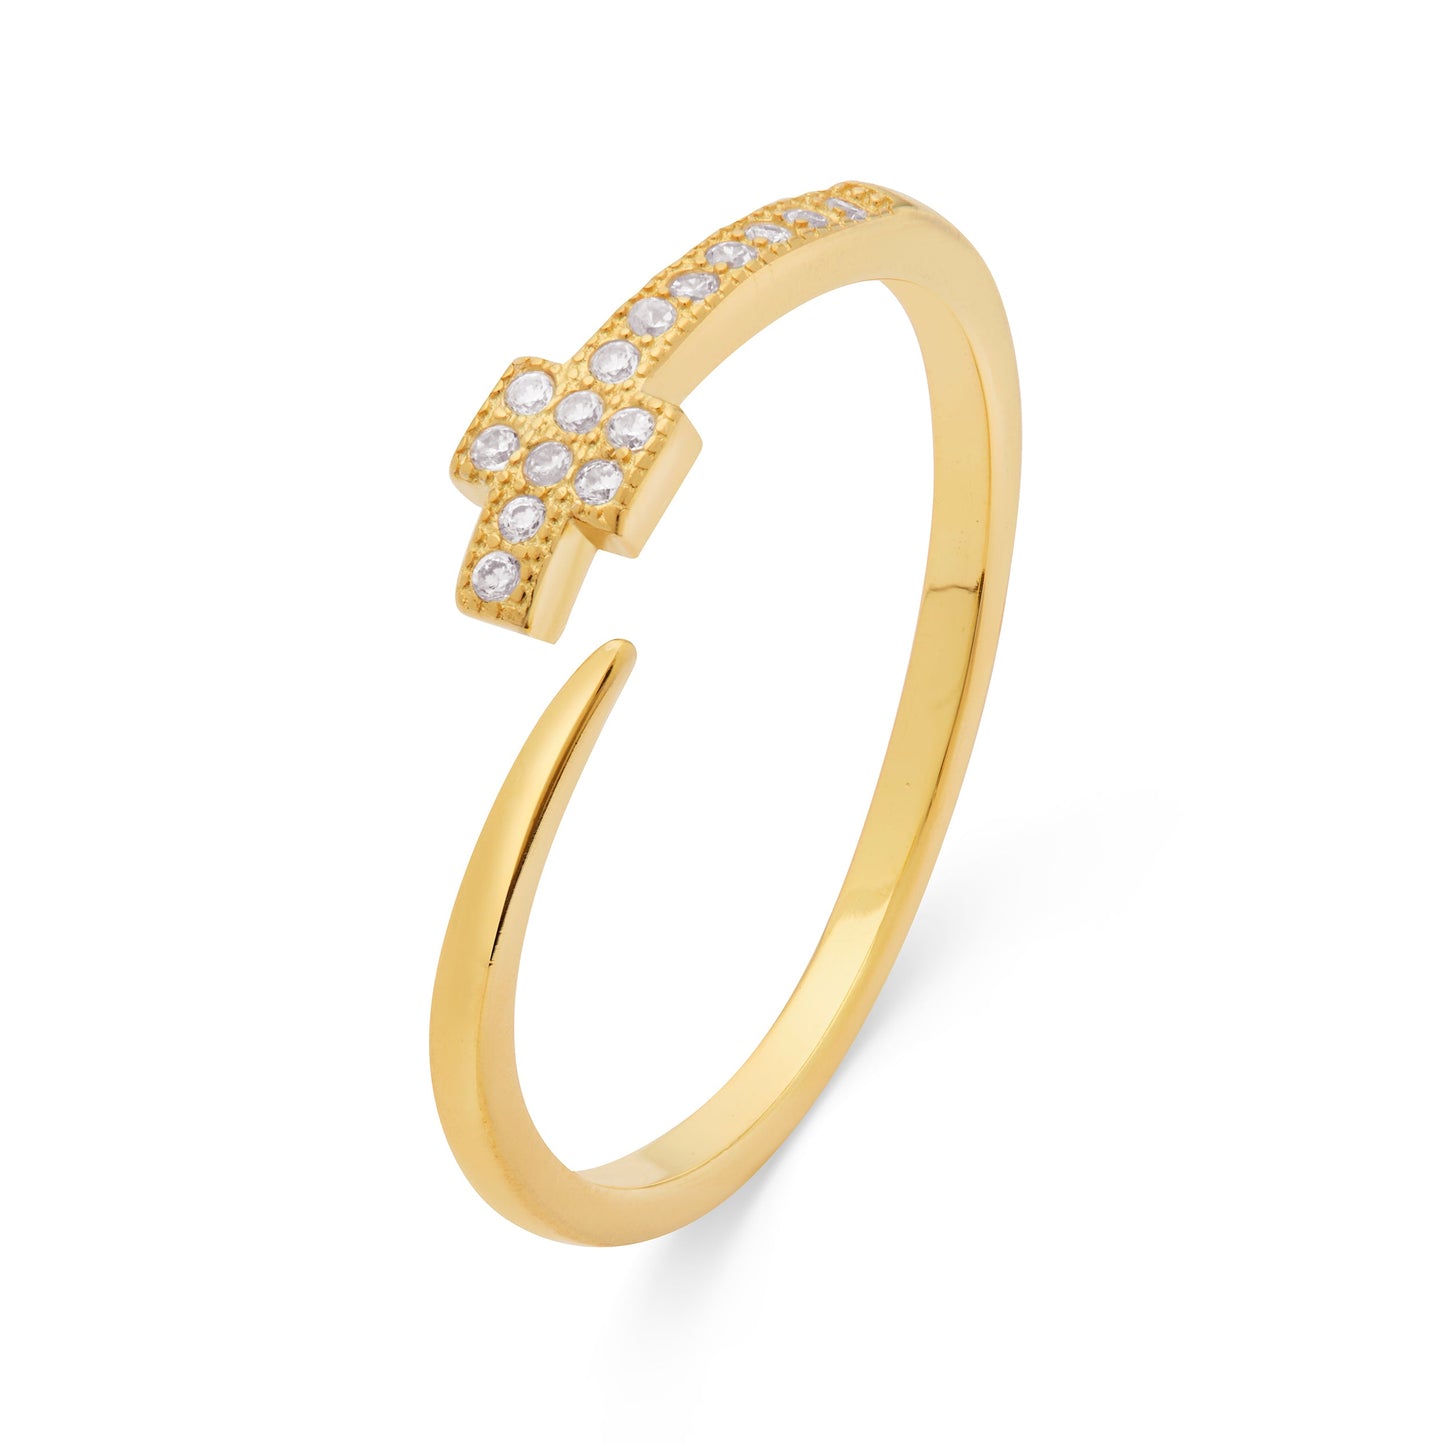 Mondo Cattolico Ring Adjustable Gold-plated Sterling Silver Adjustable Ring With Cubic Zirconia End Cross